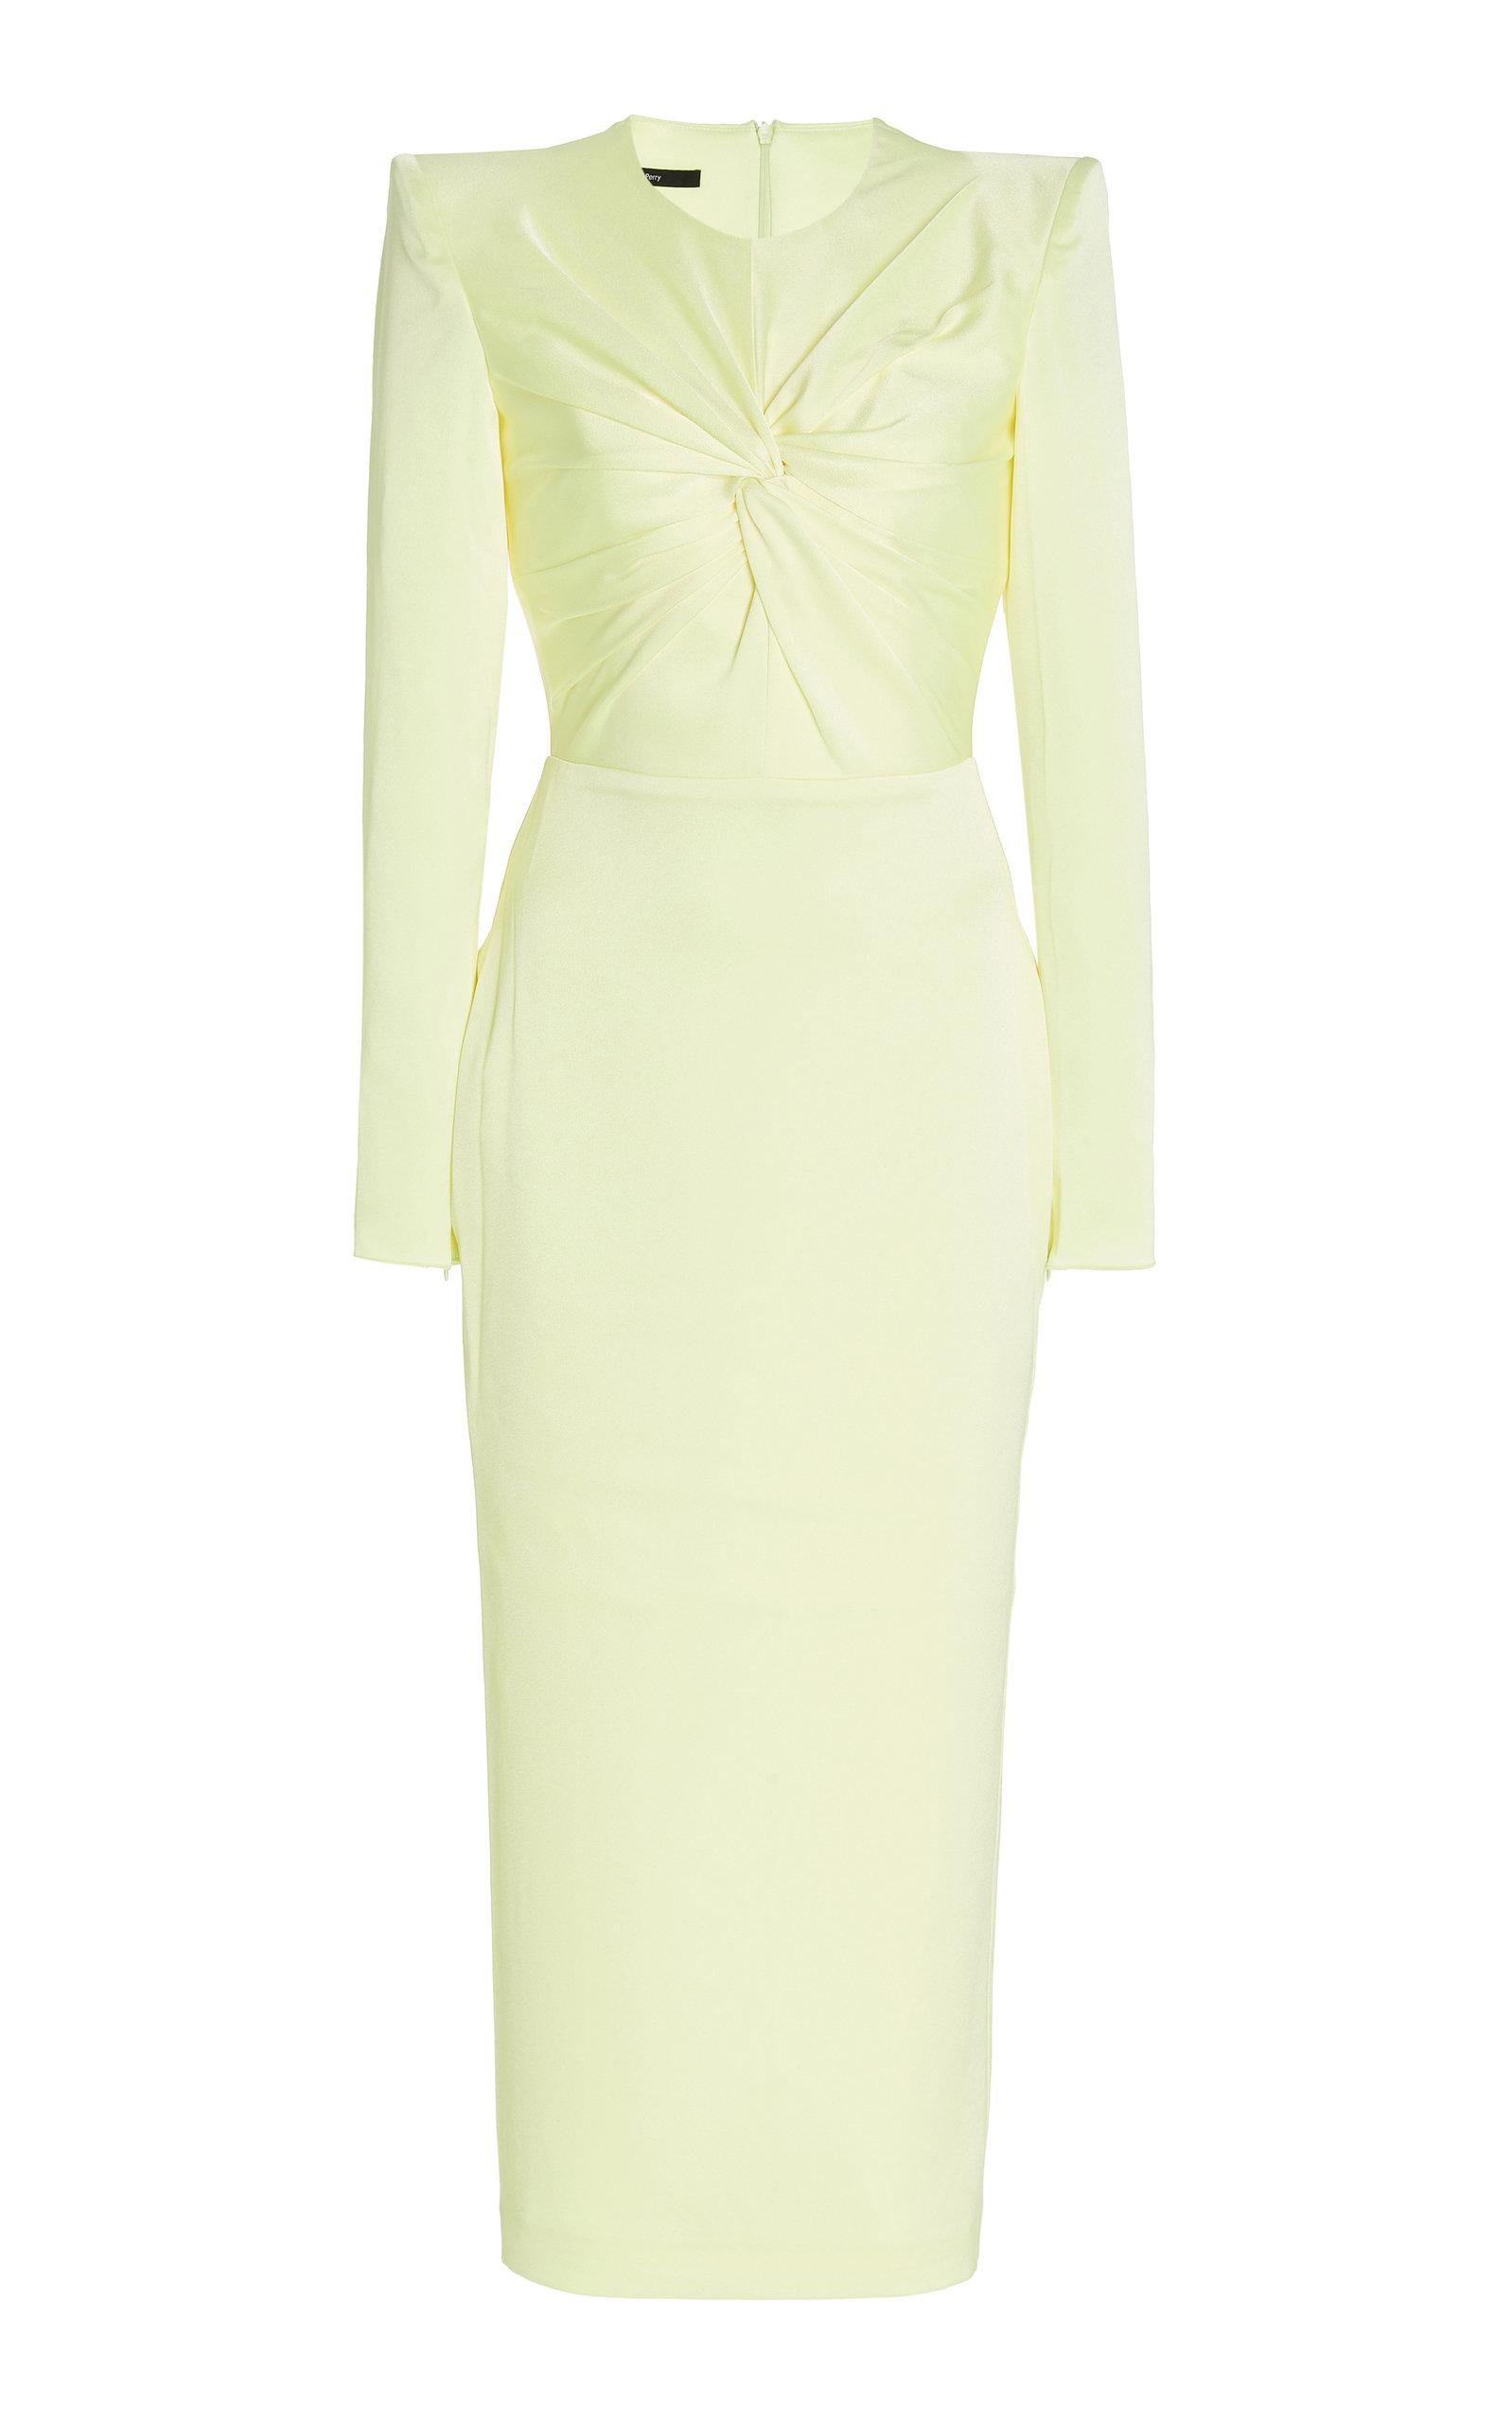 Alex Perry Monroe Satin Crepe Dress in Yellow | Lyst